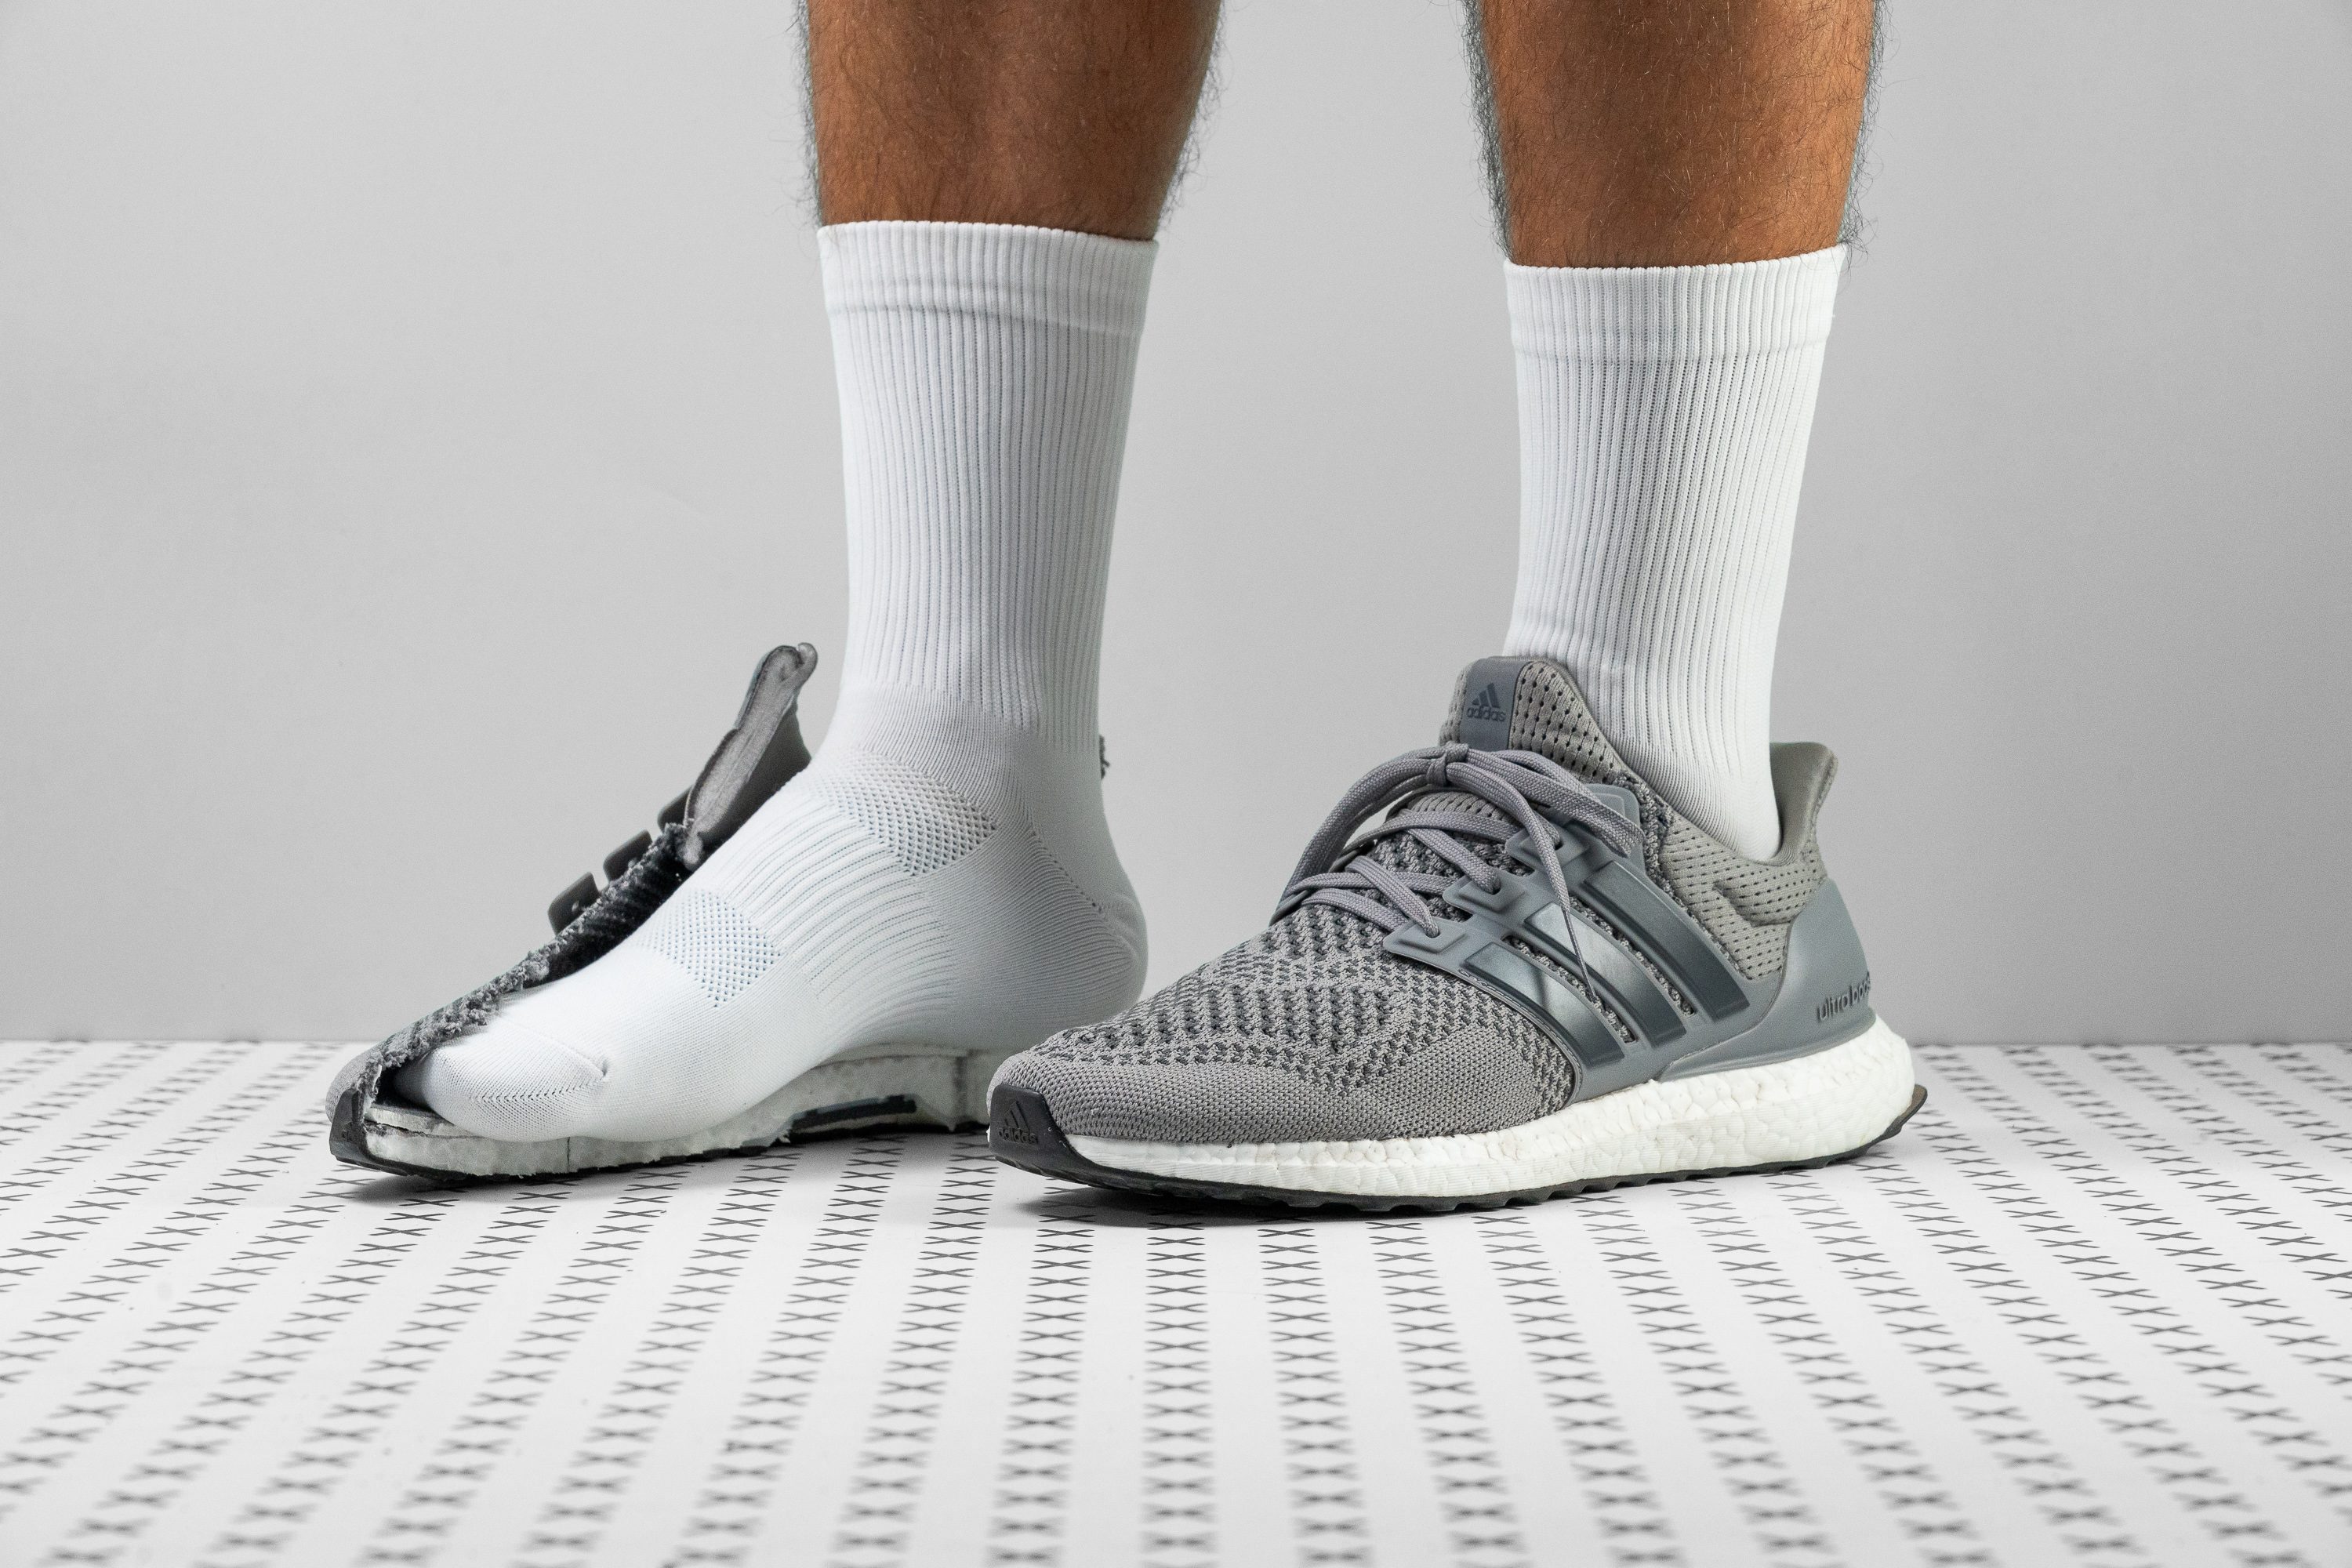 Adidas Ultra Boost 19 Review: How They Compare to the Original Boosts